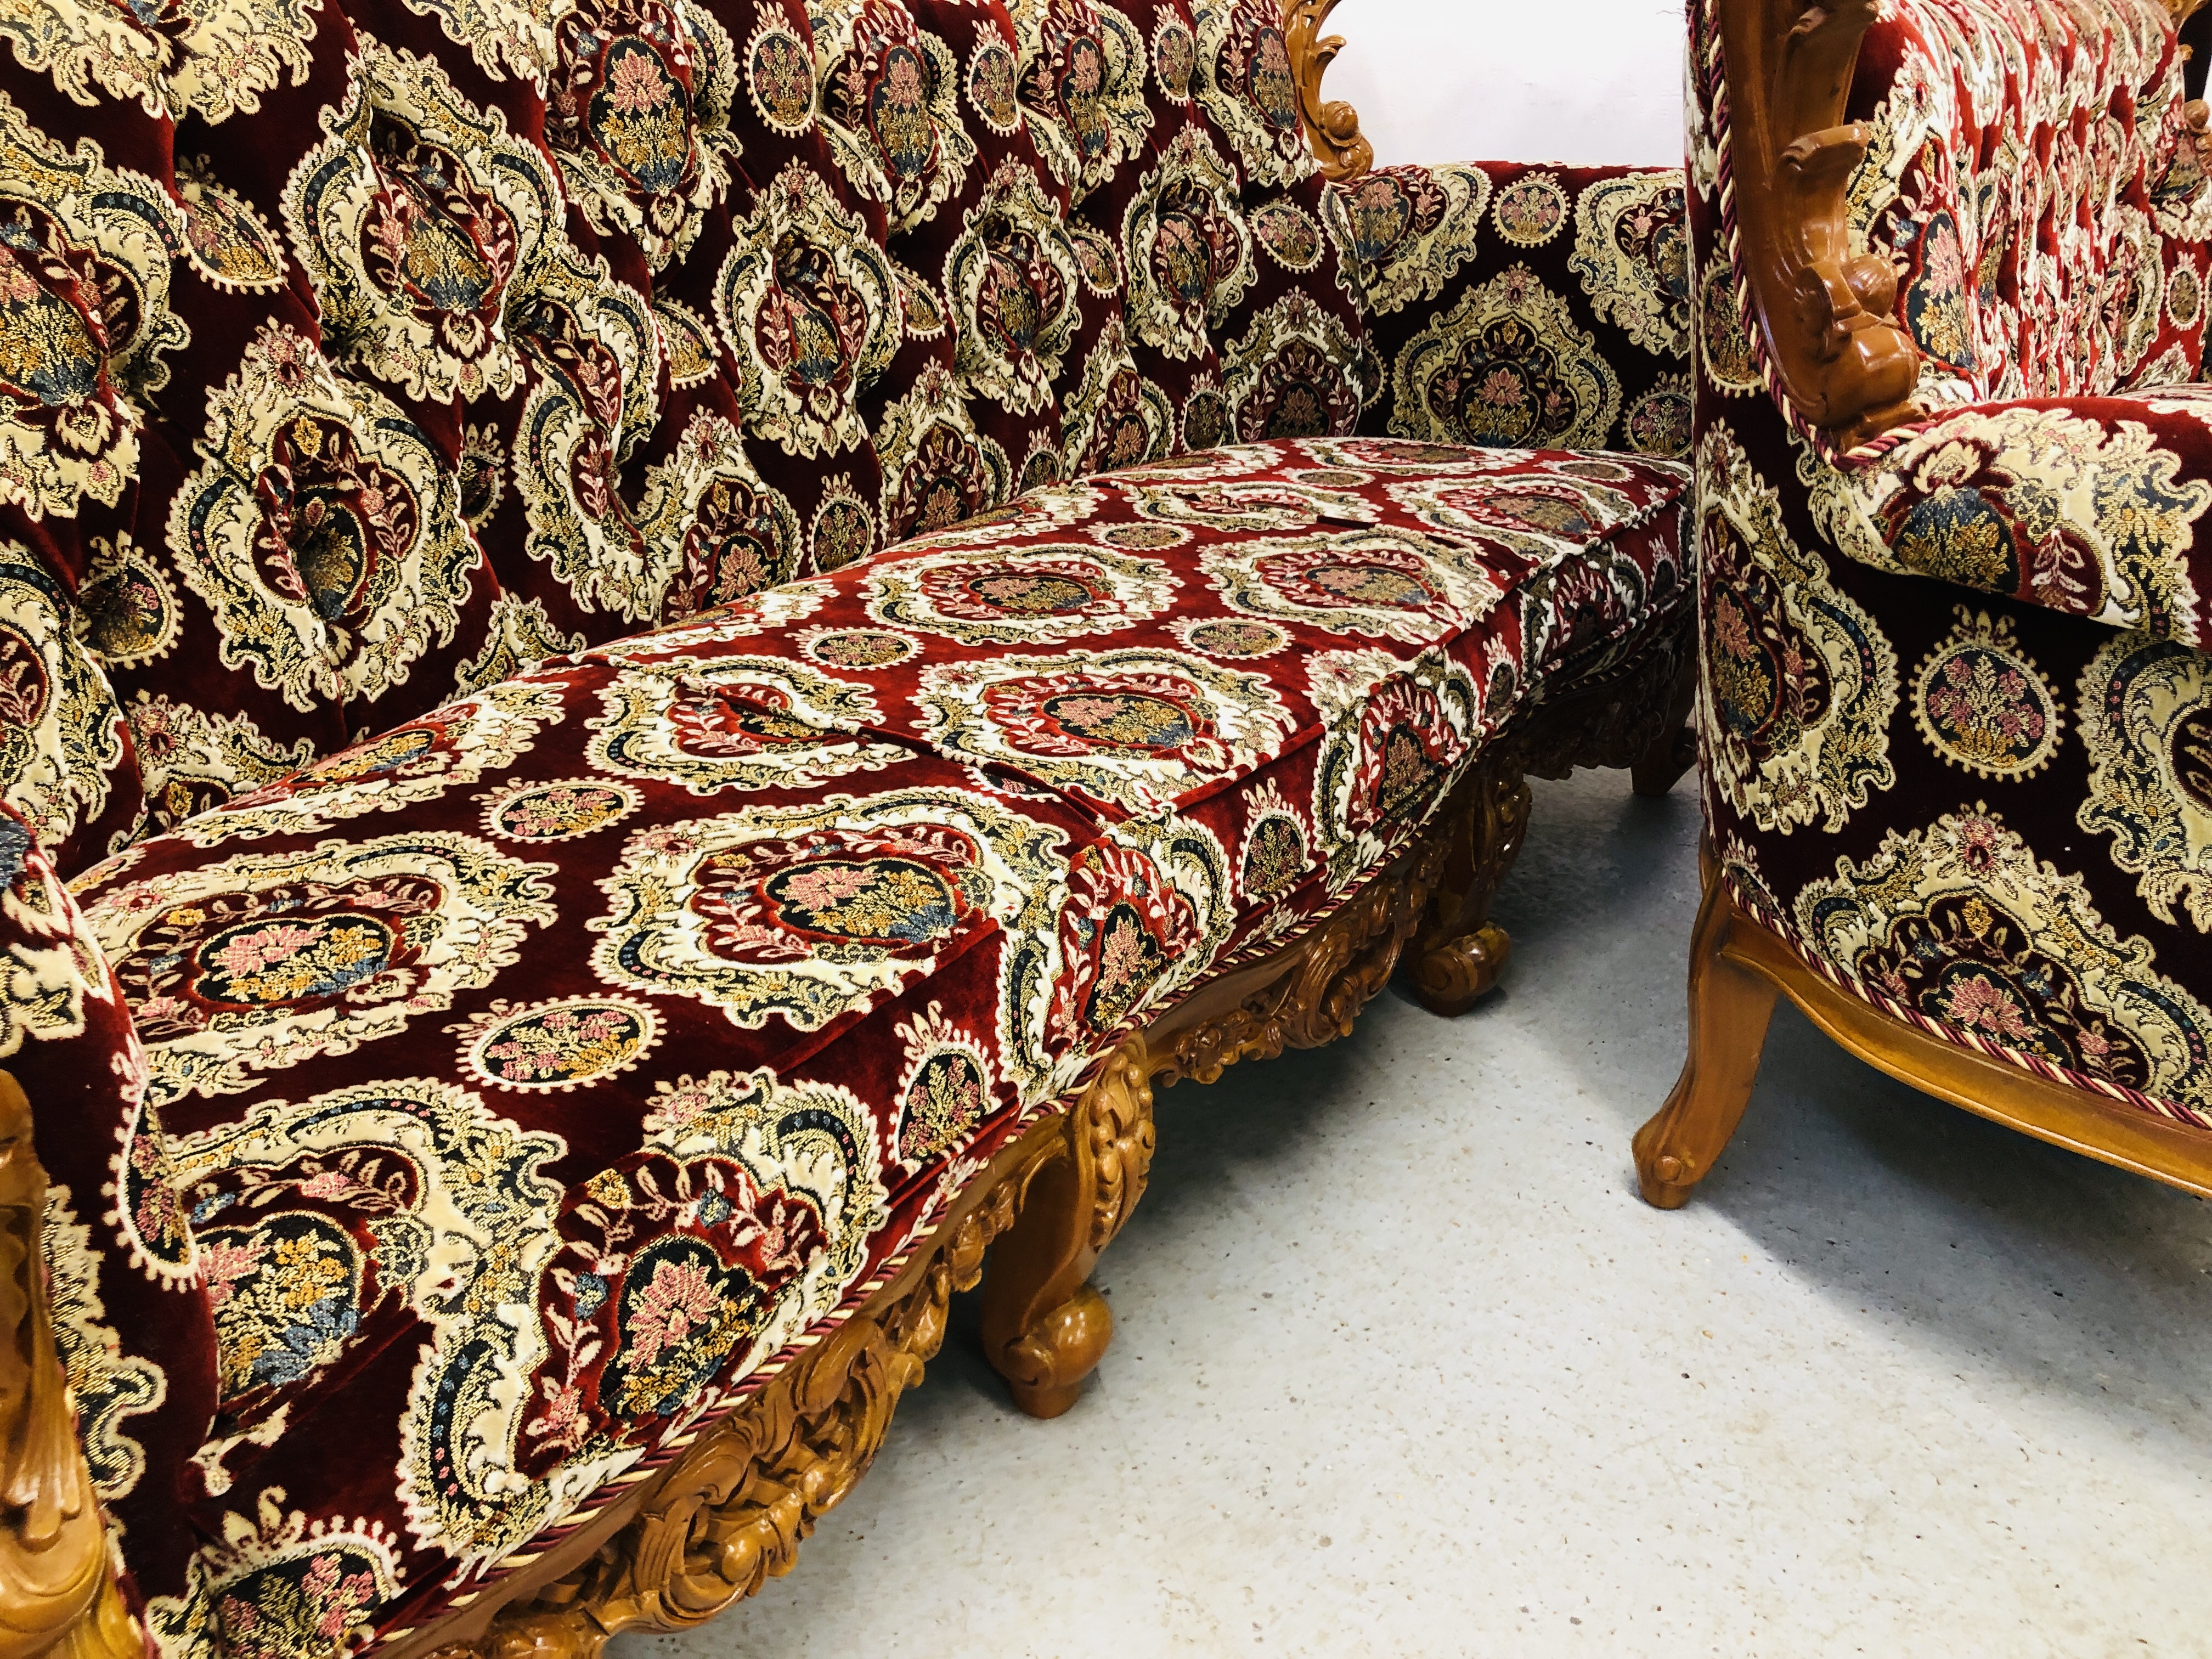 A PAIR OF HIGHLY DECORATIVE REPRODUCTION CONTINENTAL STYLE THREE SEATER COUCHES - NON COMPLIANT - Image 12 of 14